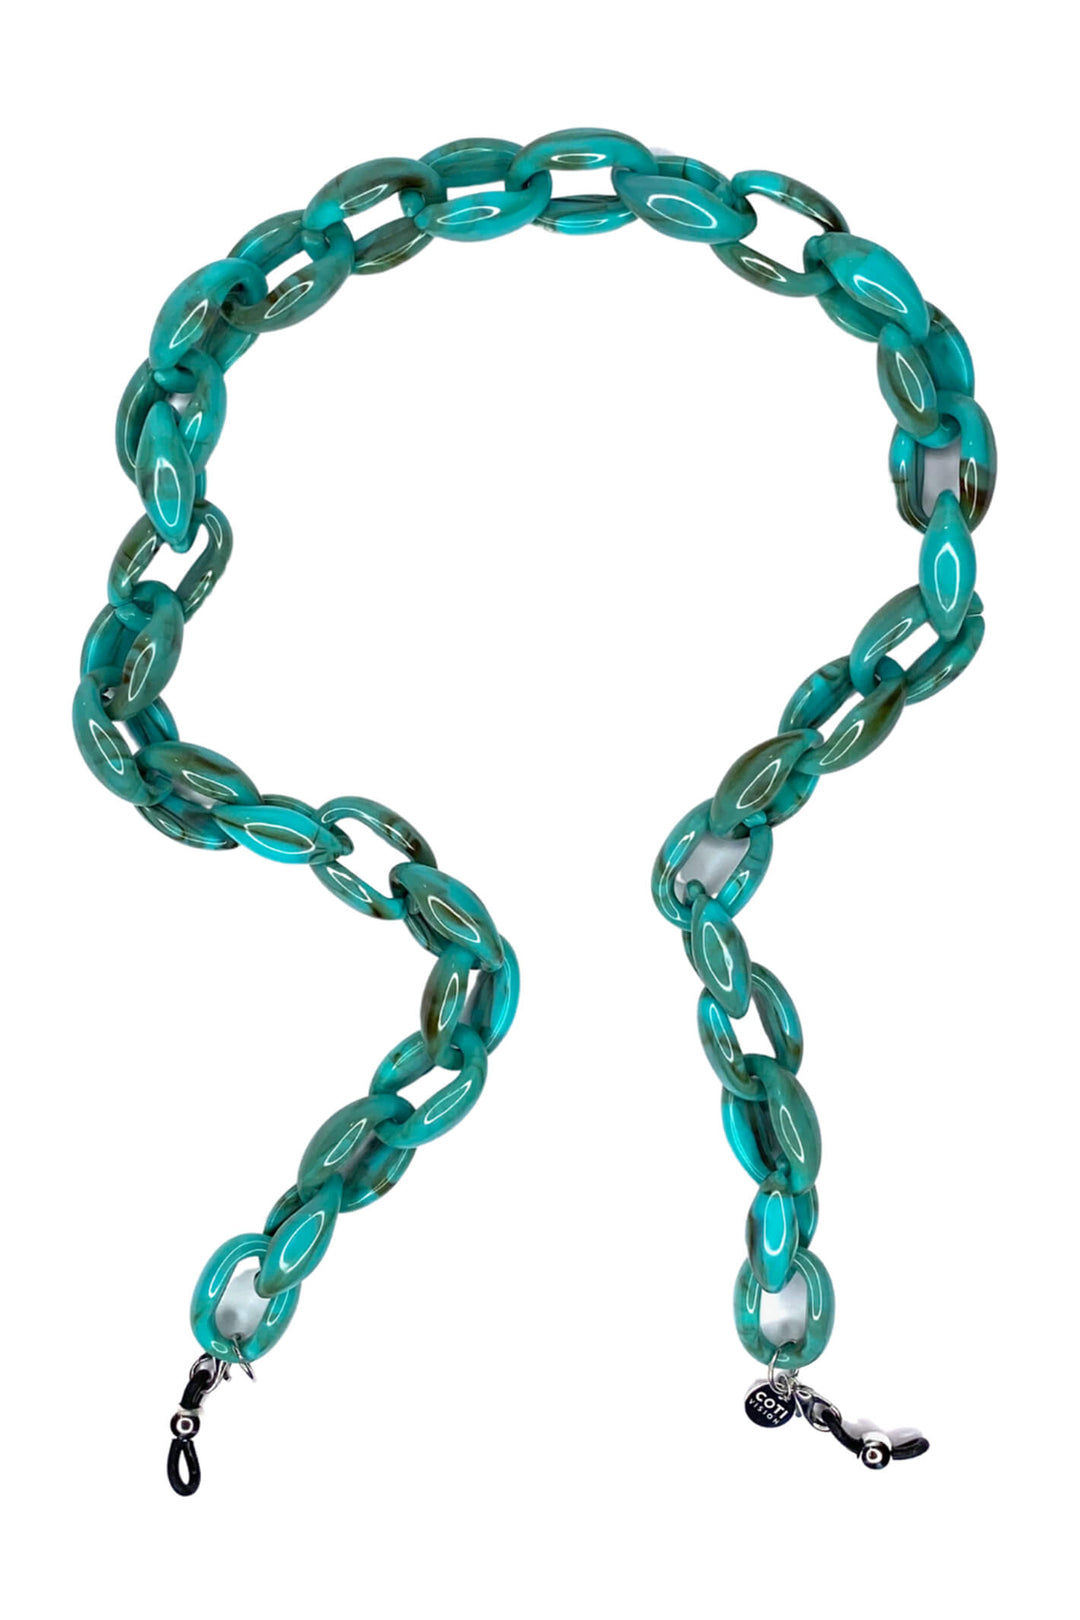 Coti Whitby Turquoise Glasses Chain - Olivia Grace Fashion